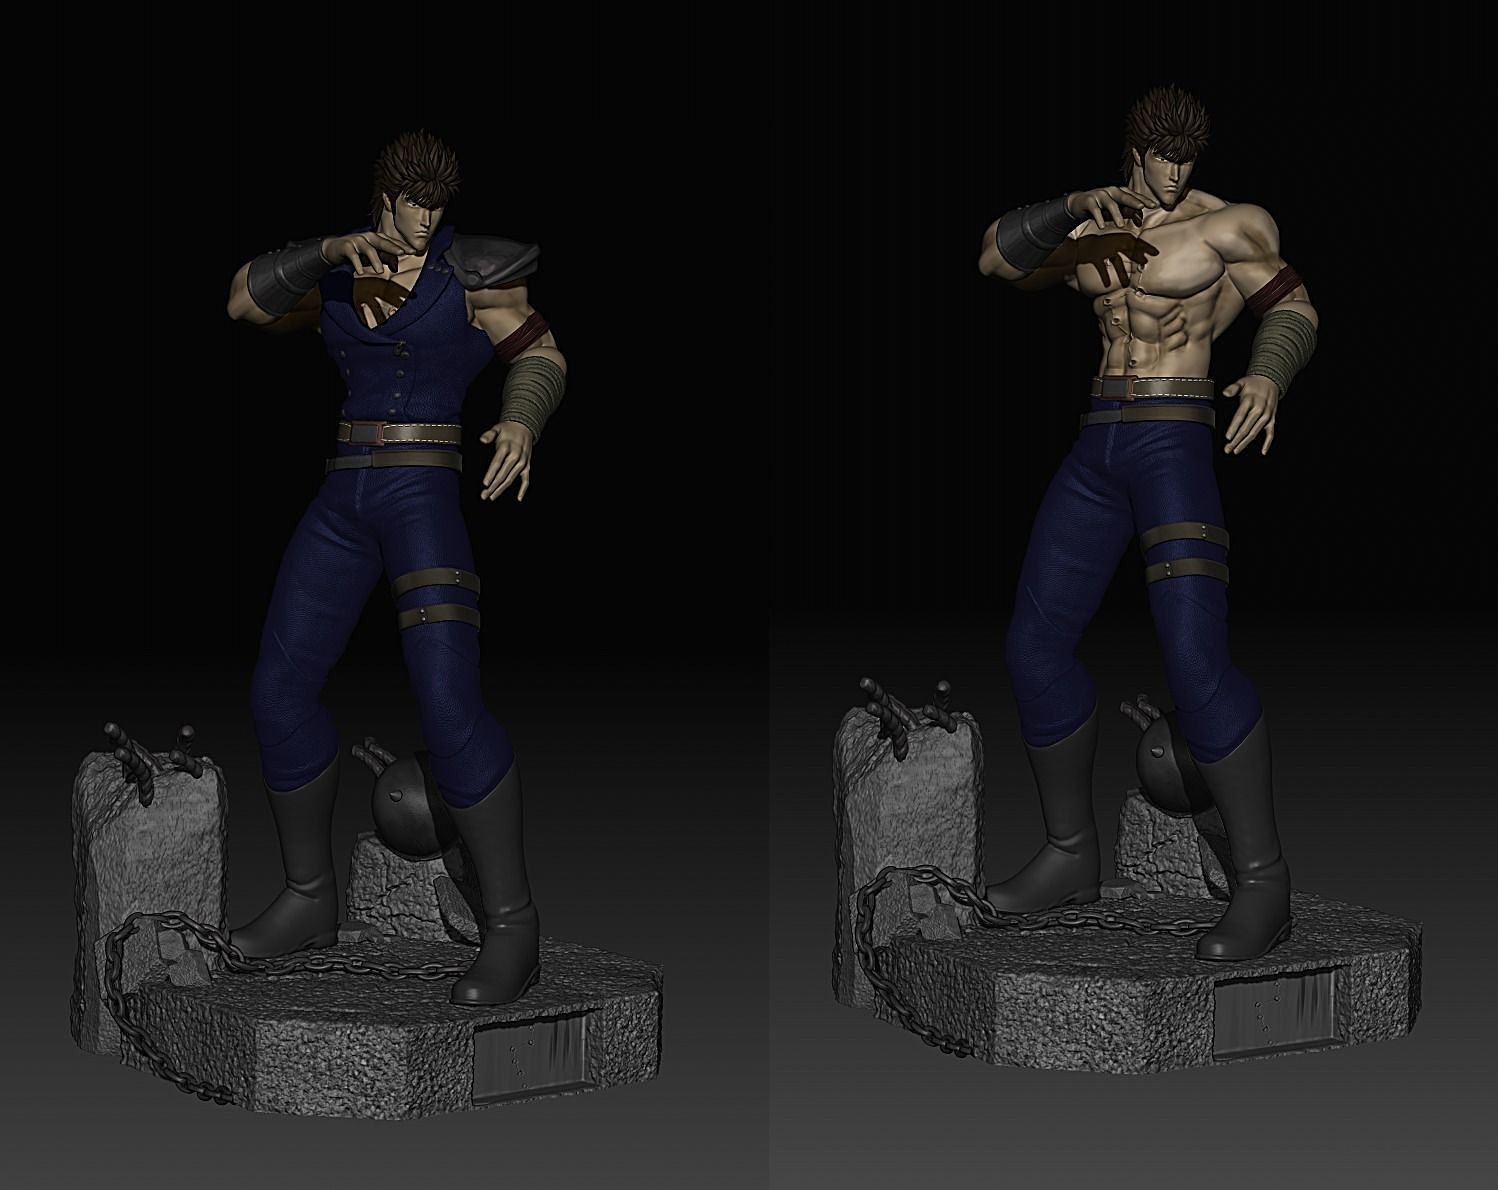 Kenshiro From Fist of the North Star